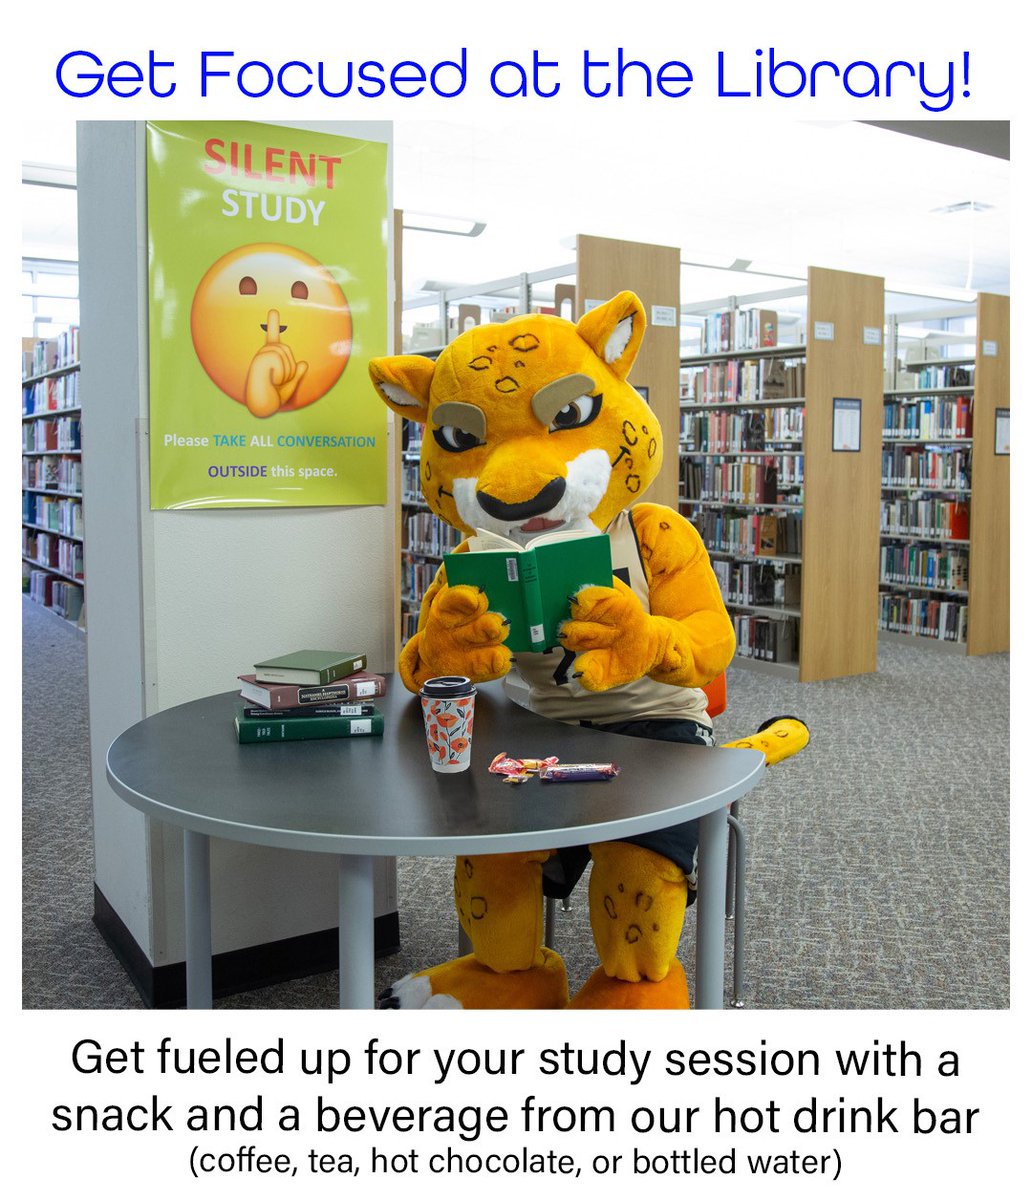 Attention, Temple College Students! Today through May 9, the Hubert M. Dawson Library has snacks and hot drinks -- coffee, tea, hot chocolate -- available to help you study! #YourCommunitysCollege